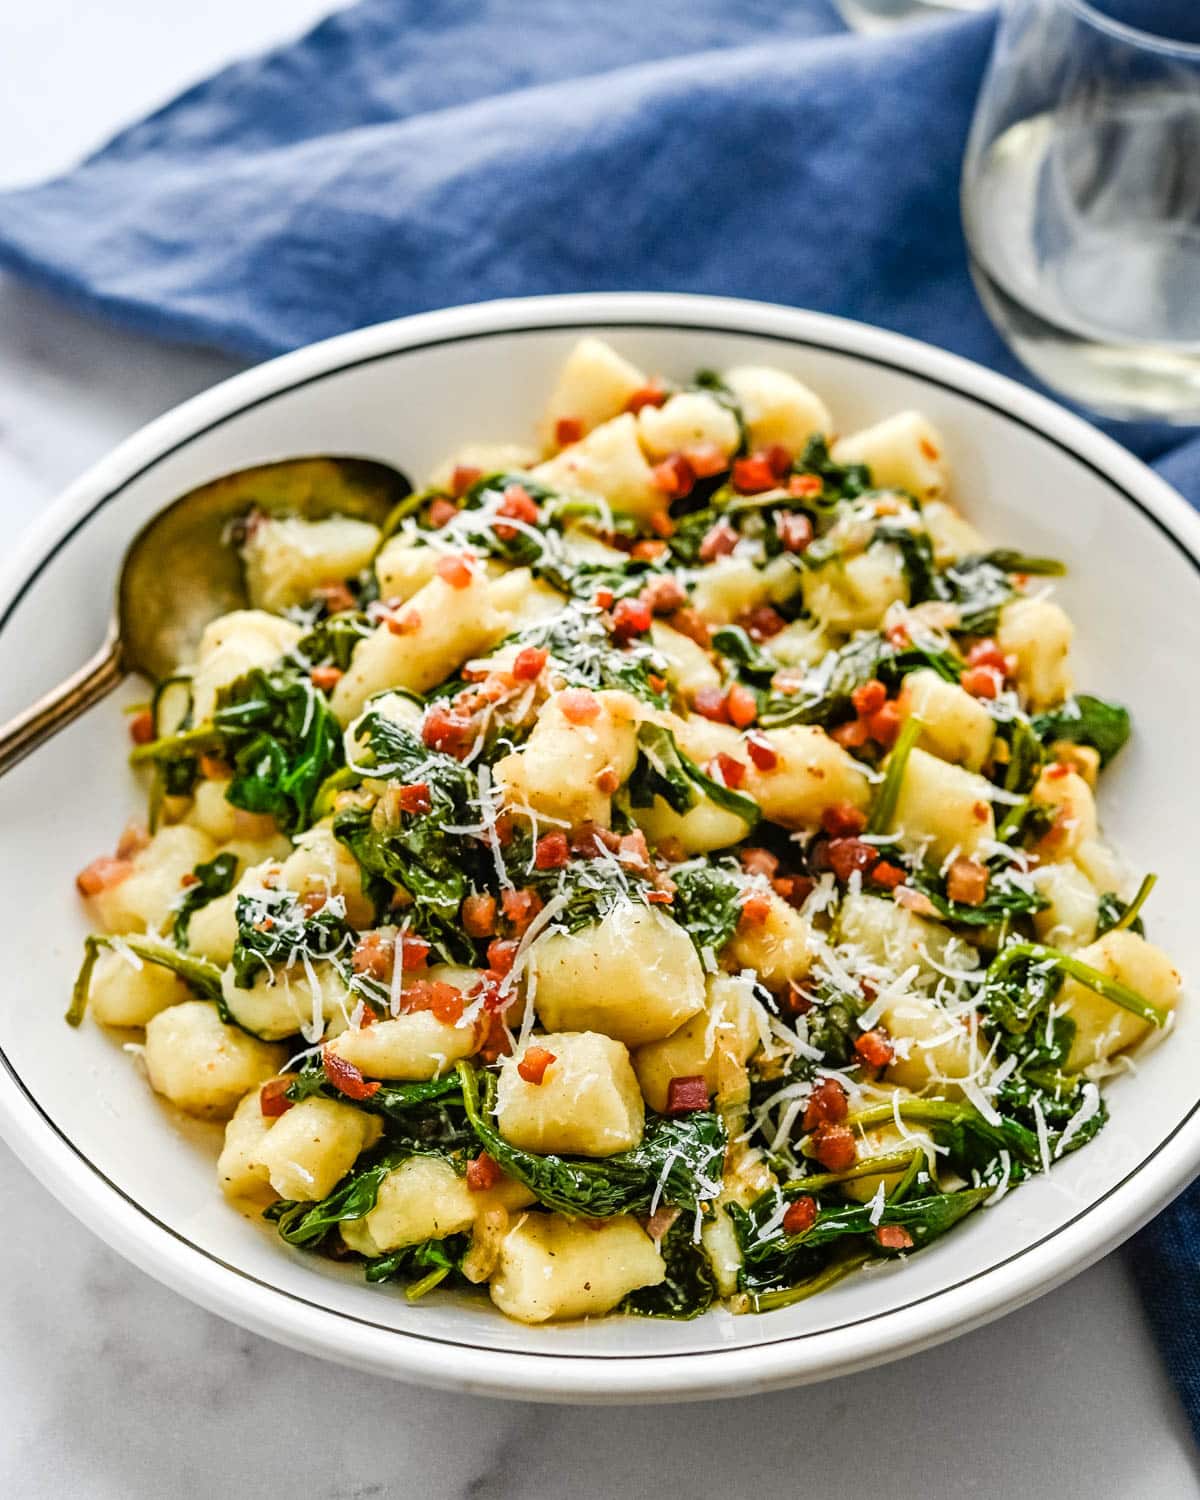 A serving of Italian gnocchi in a shallow bowl.